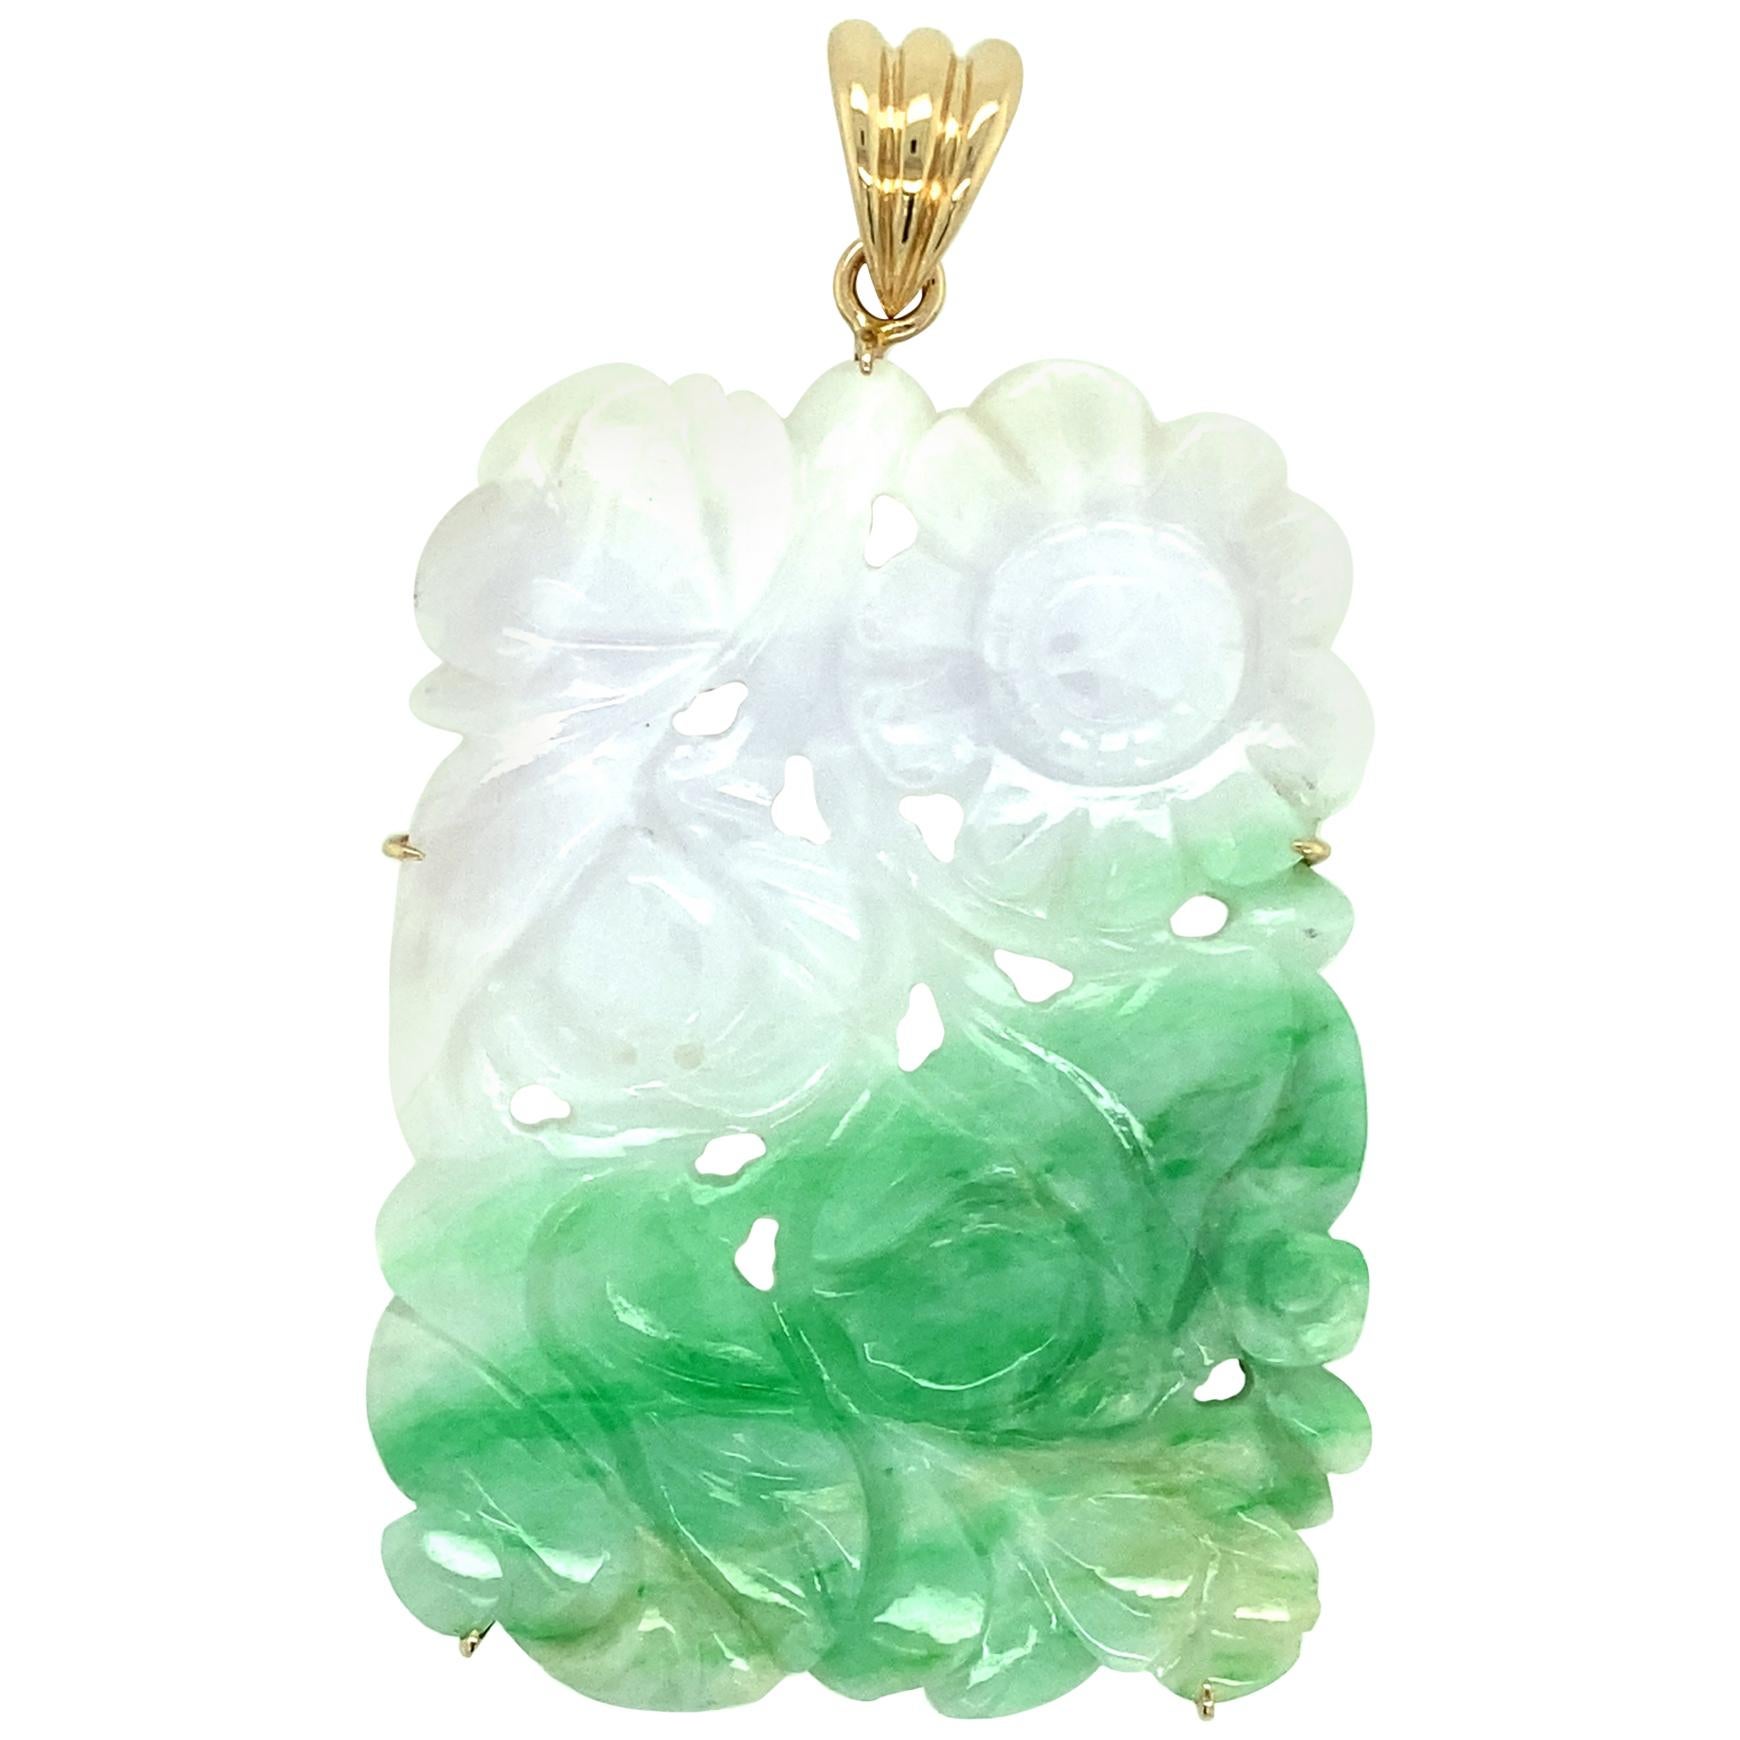 1970s White and Green Carved Jadeite Pendant